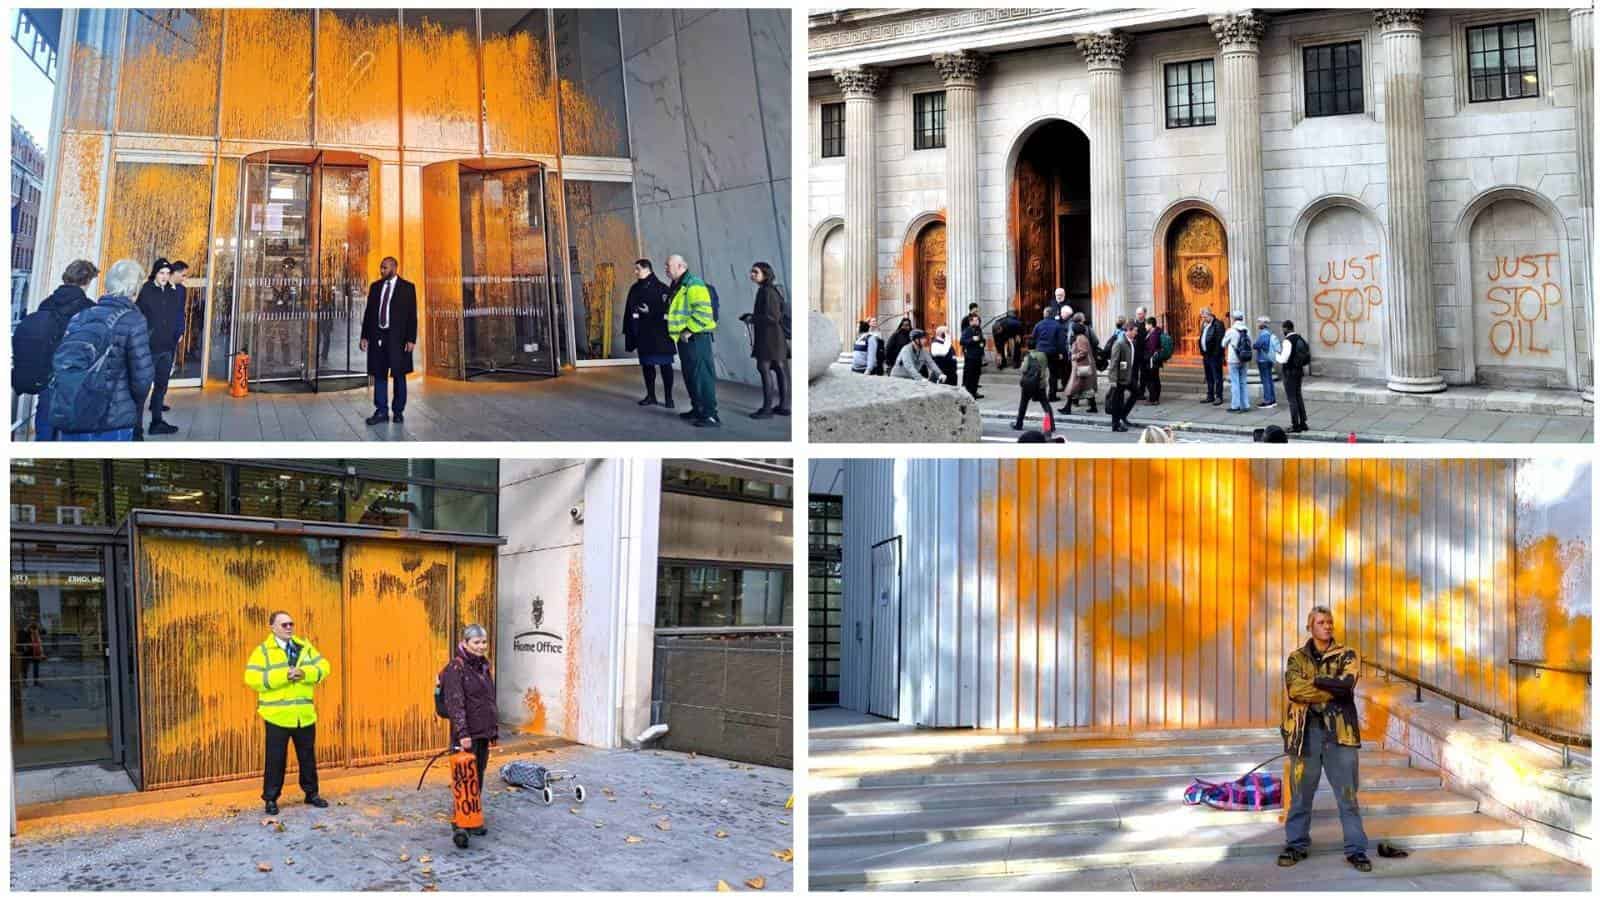 Just Stop Oil protesters spray orange paint onto Bank of England